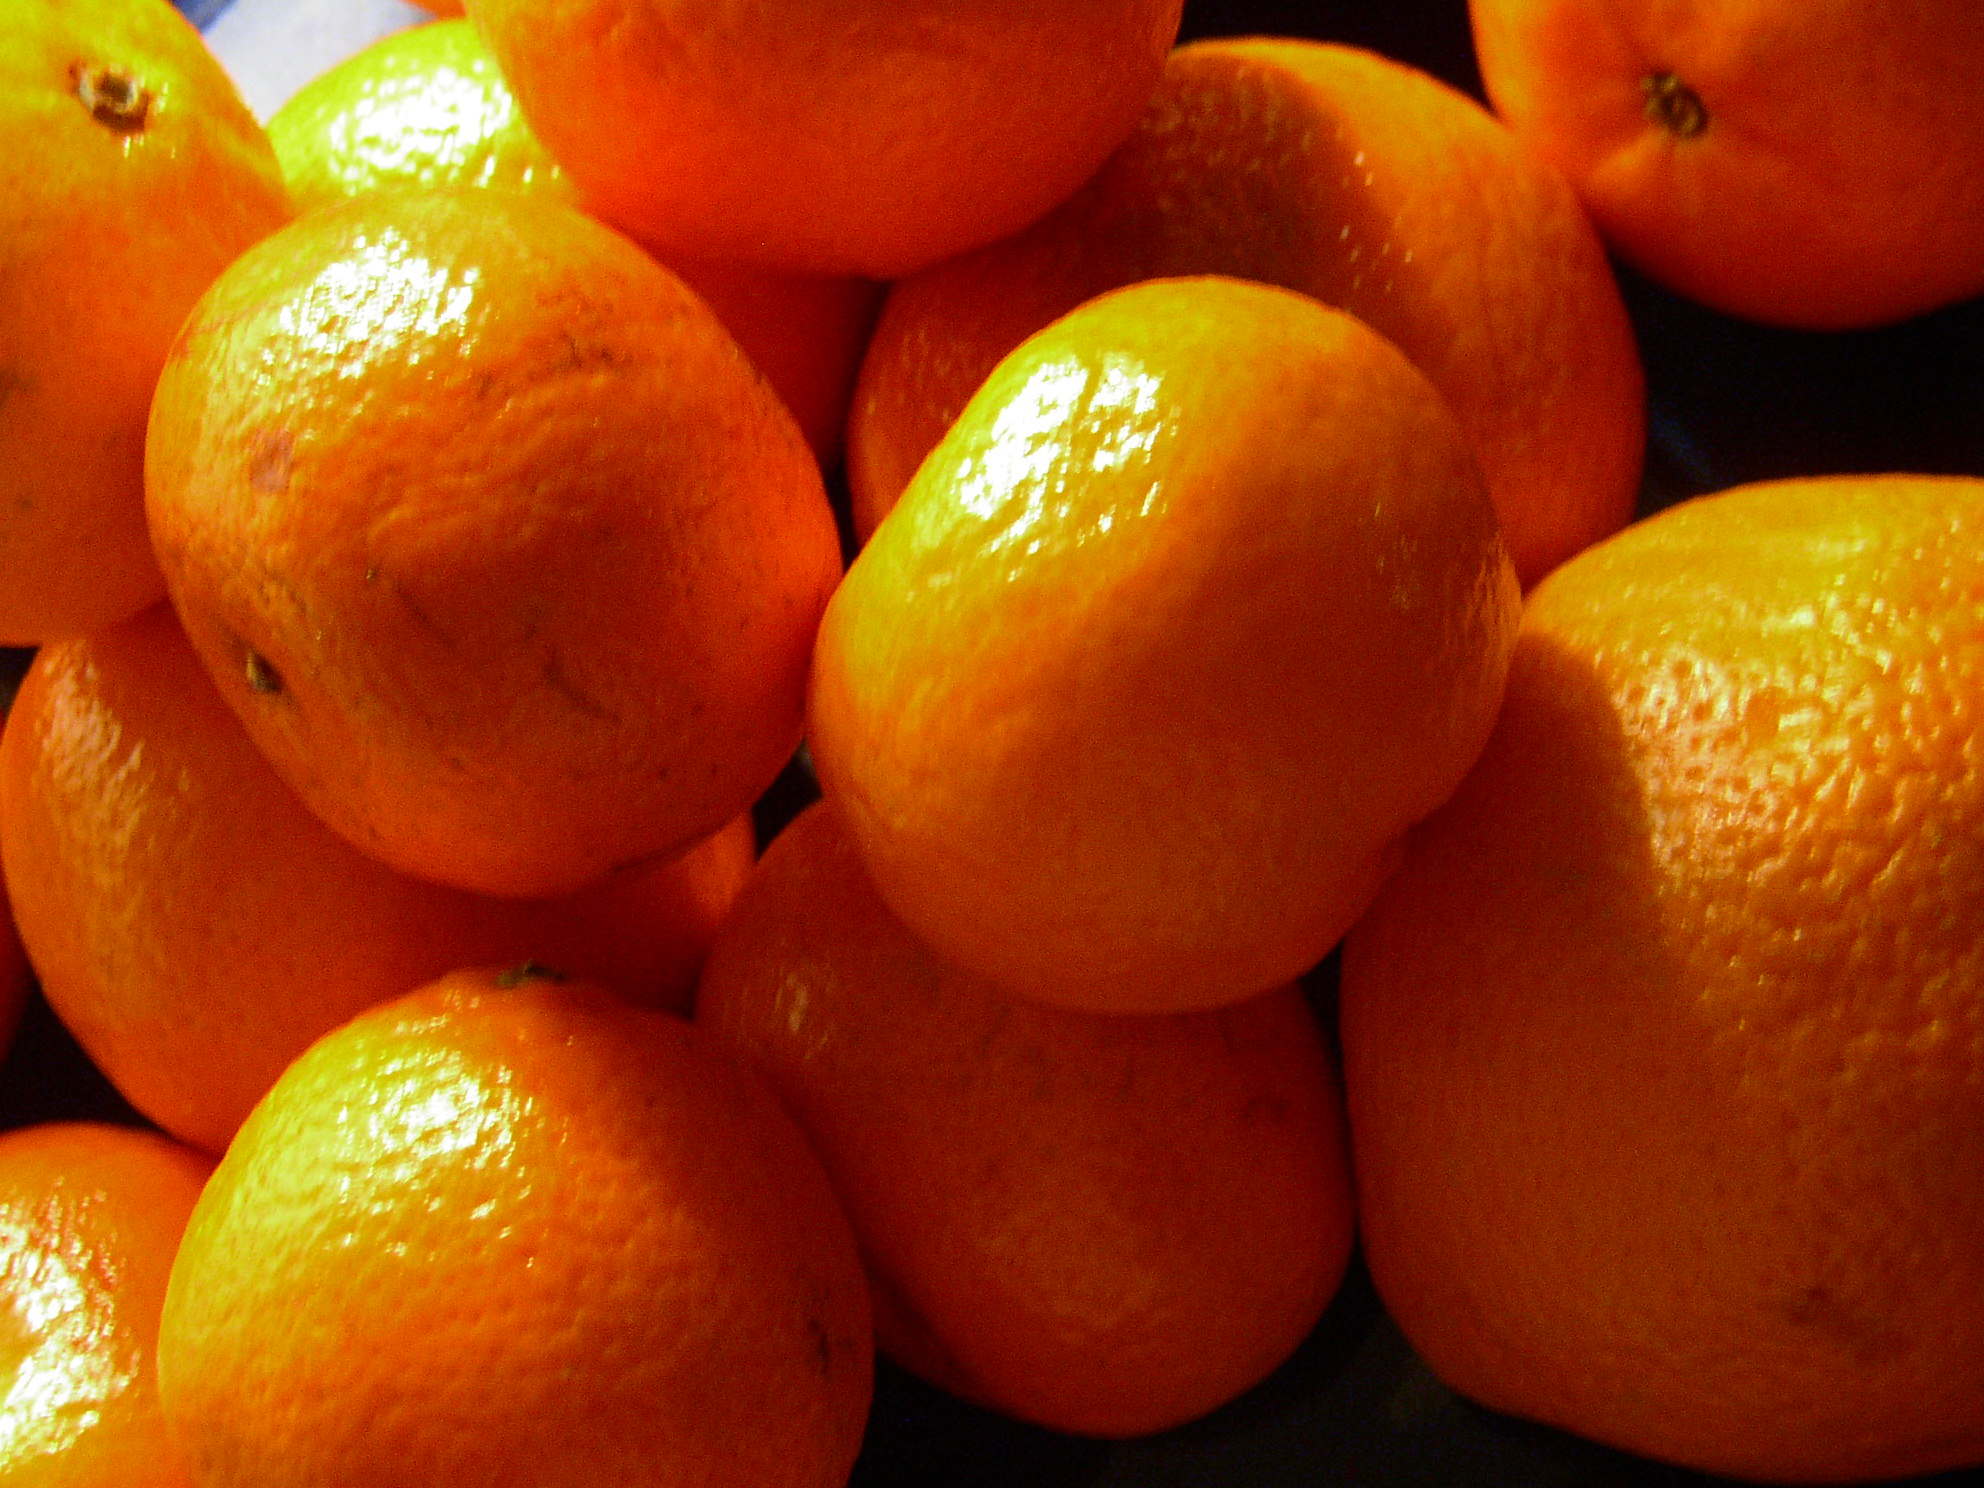 an orange is sitting atop the pile of other citrus fruits